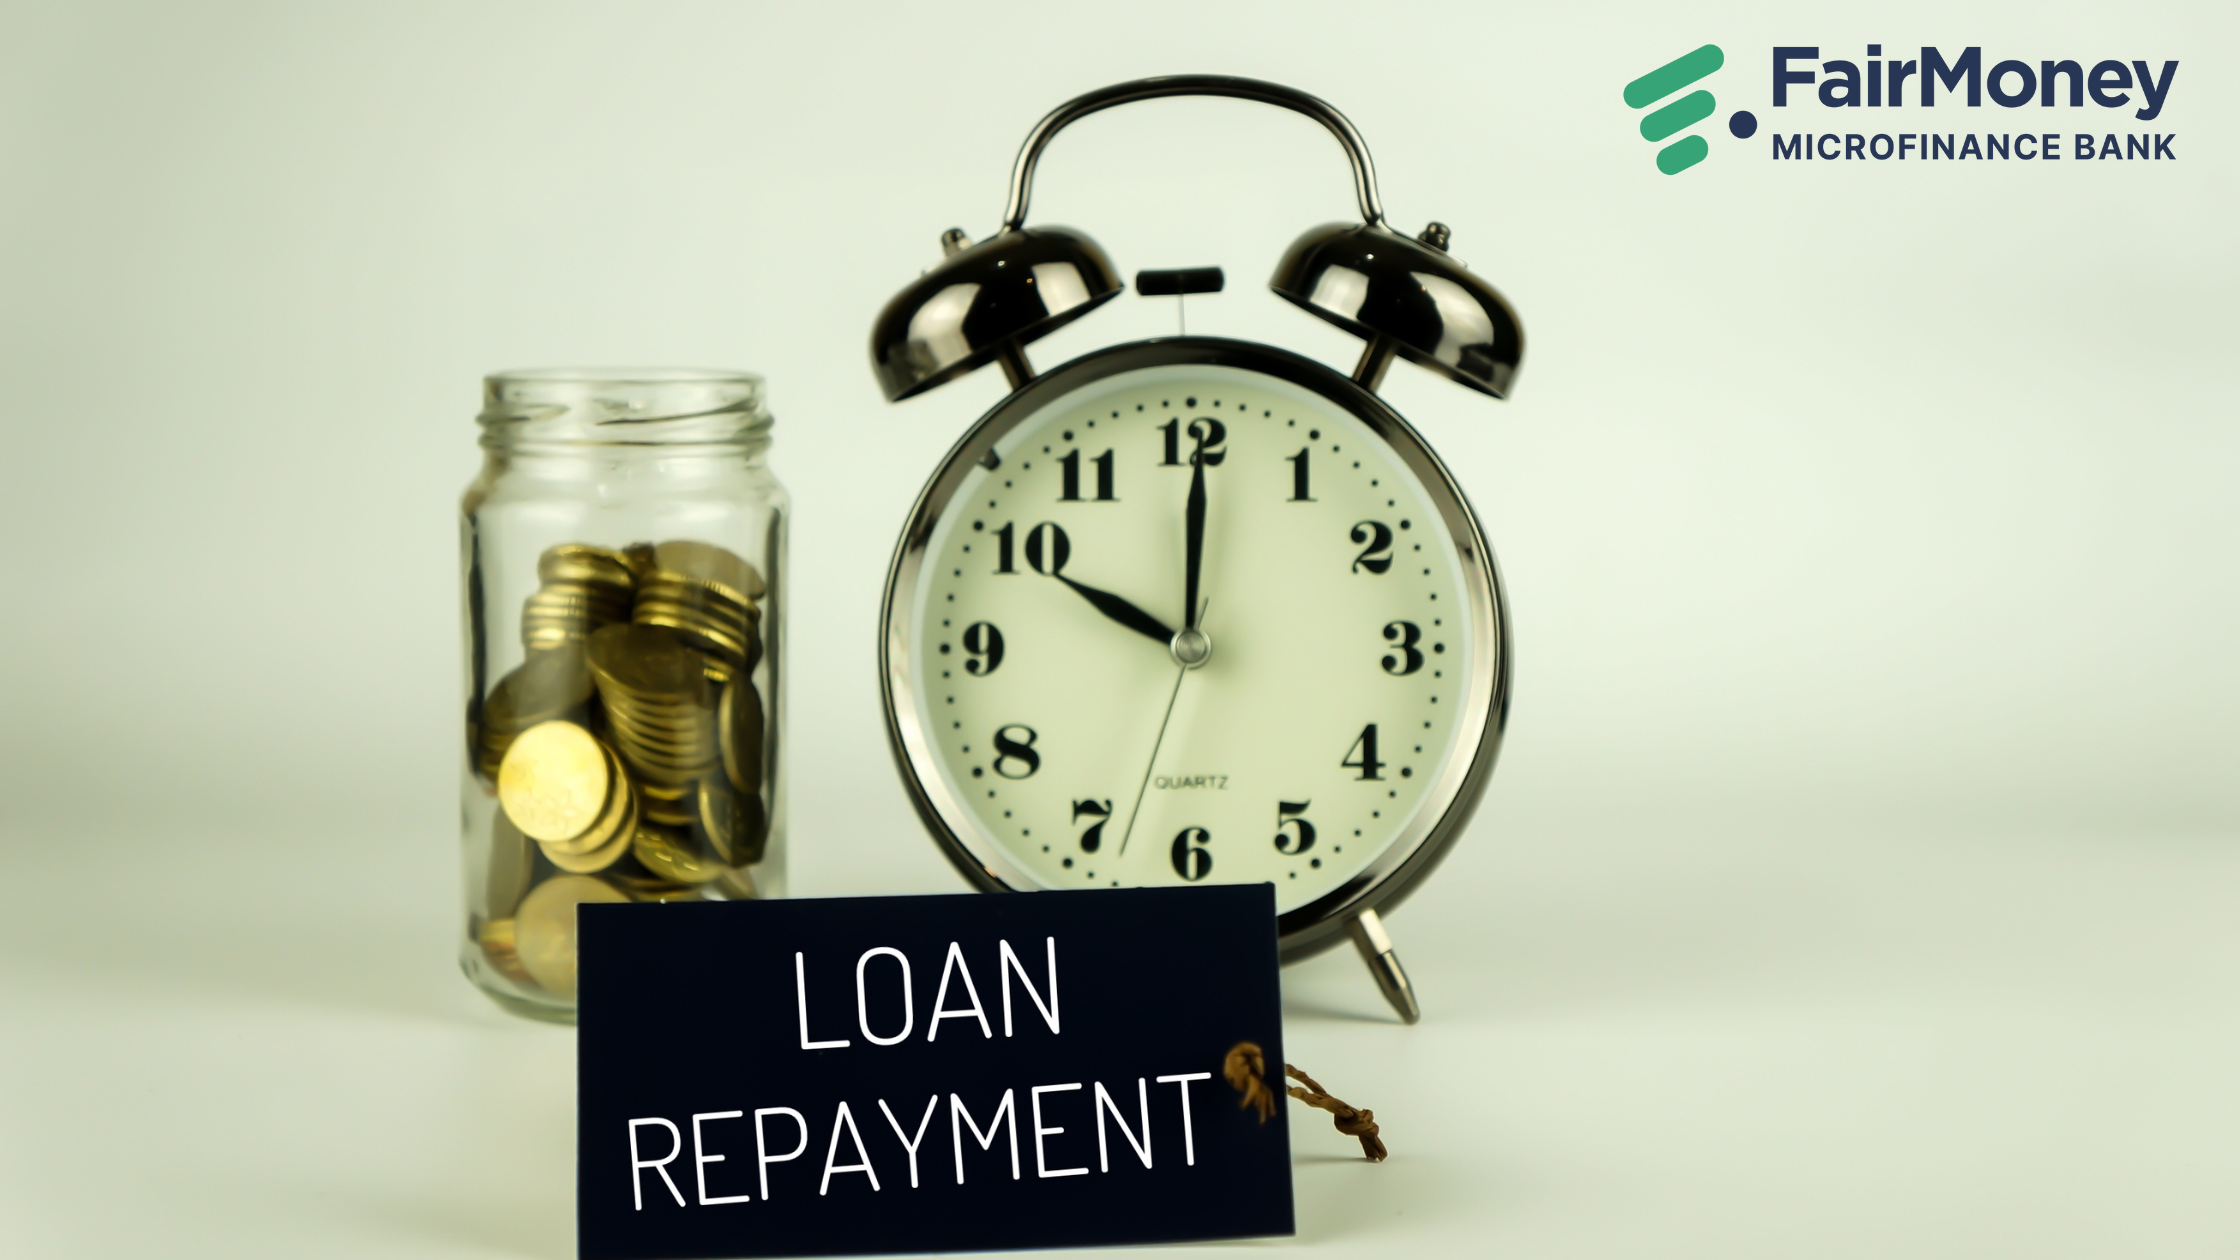 Benefits of Early Loan Repaymentfeatured image